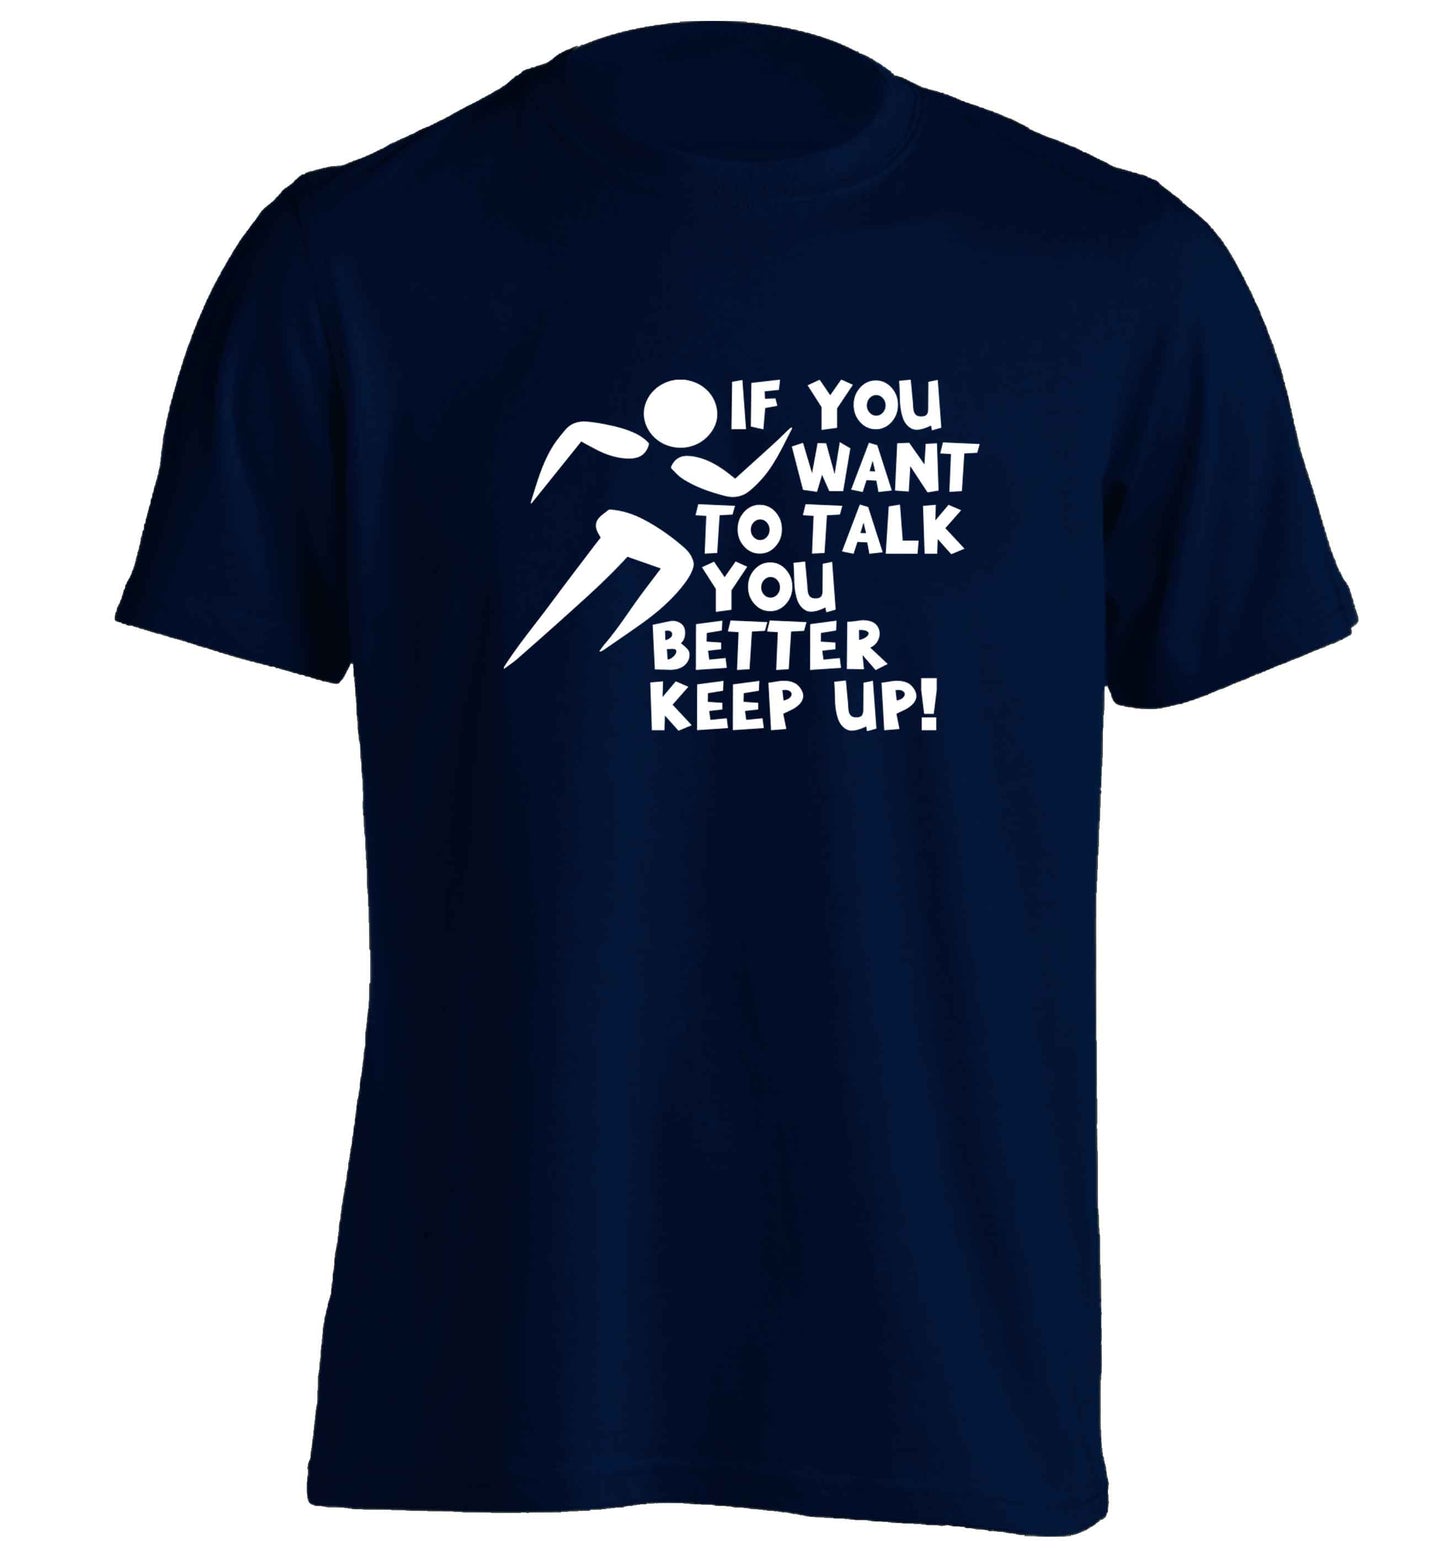 If you want to talk you better keep up! adults unisex navy Tshirt 2XL